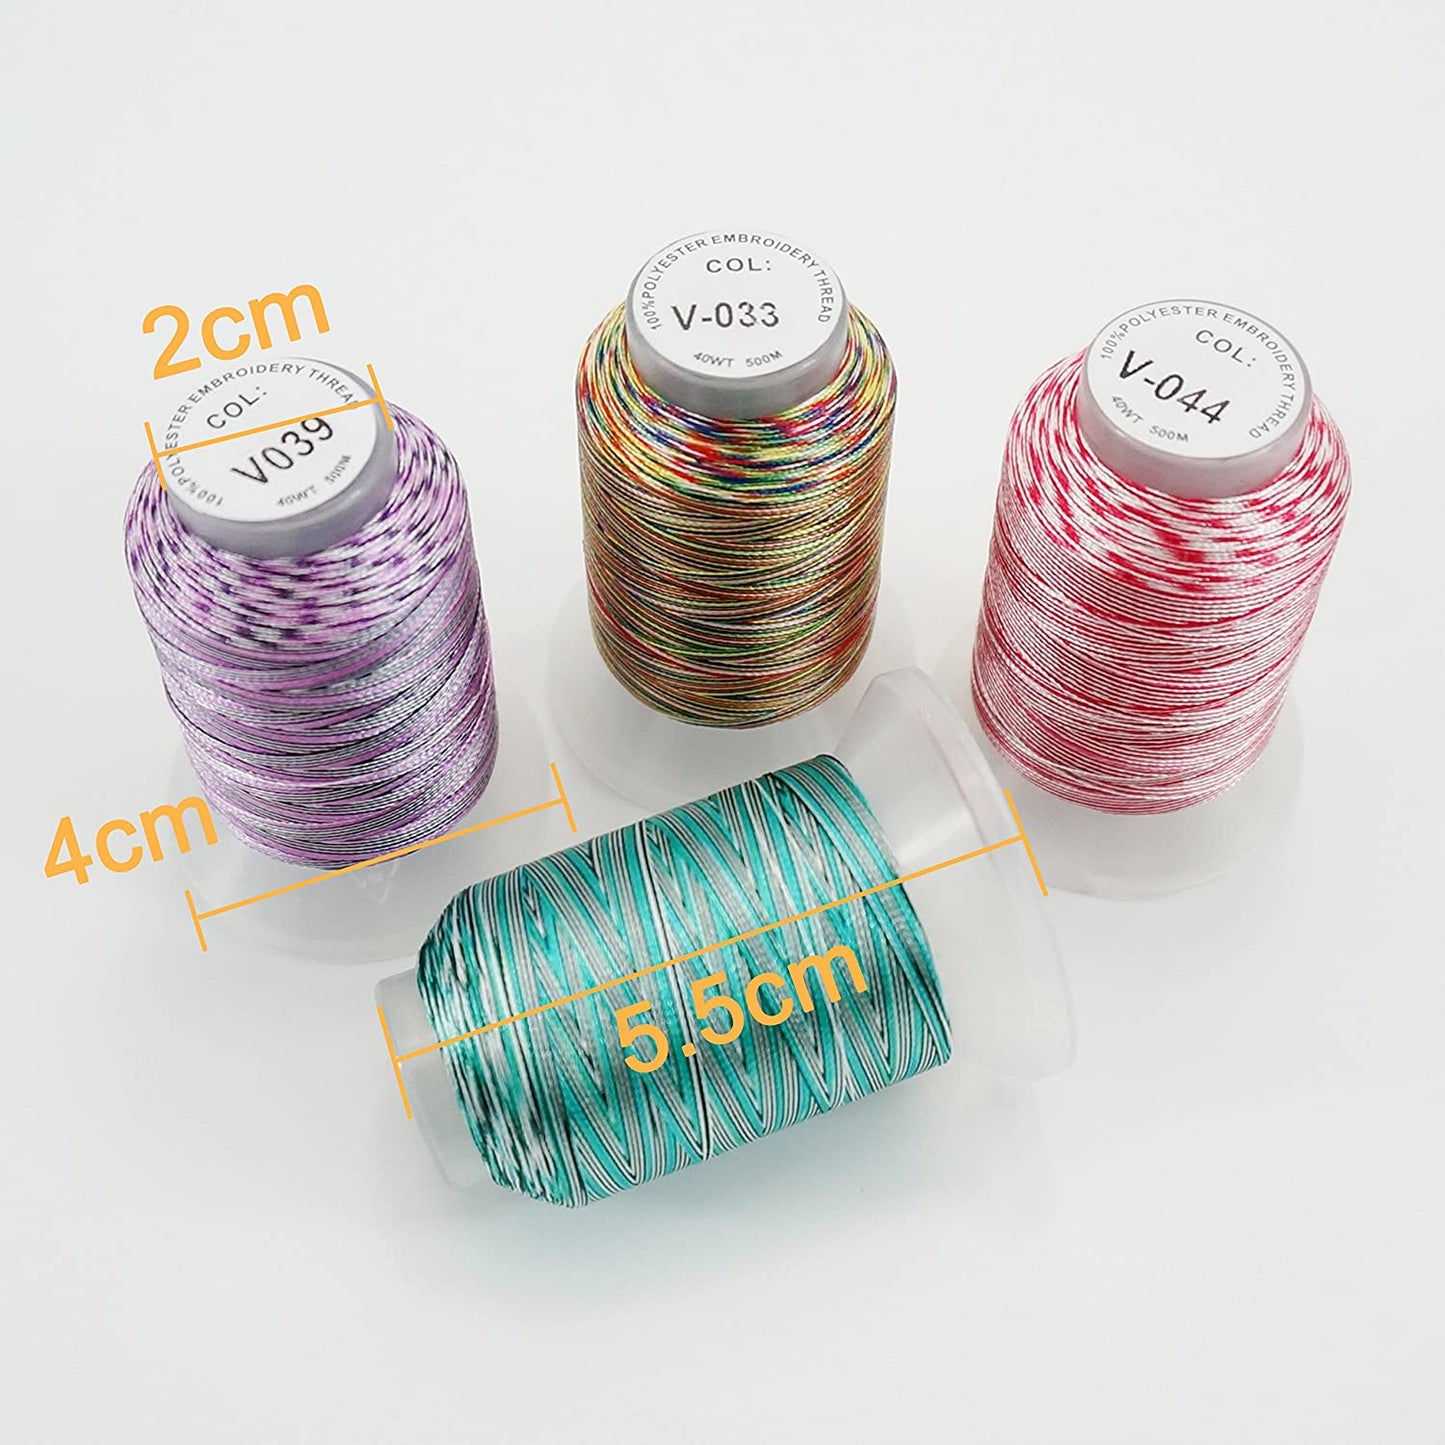 25 Colors Variegated Polyester Embroidery Machine Thread Kit 500M (550Y) Each Spool for Brother Janome Babylock Singer Pfaff Bernina Husqvaran Embroidery and Sewing Machines